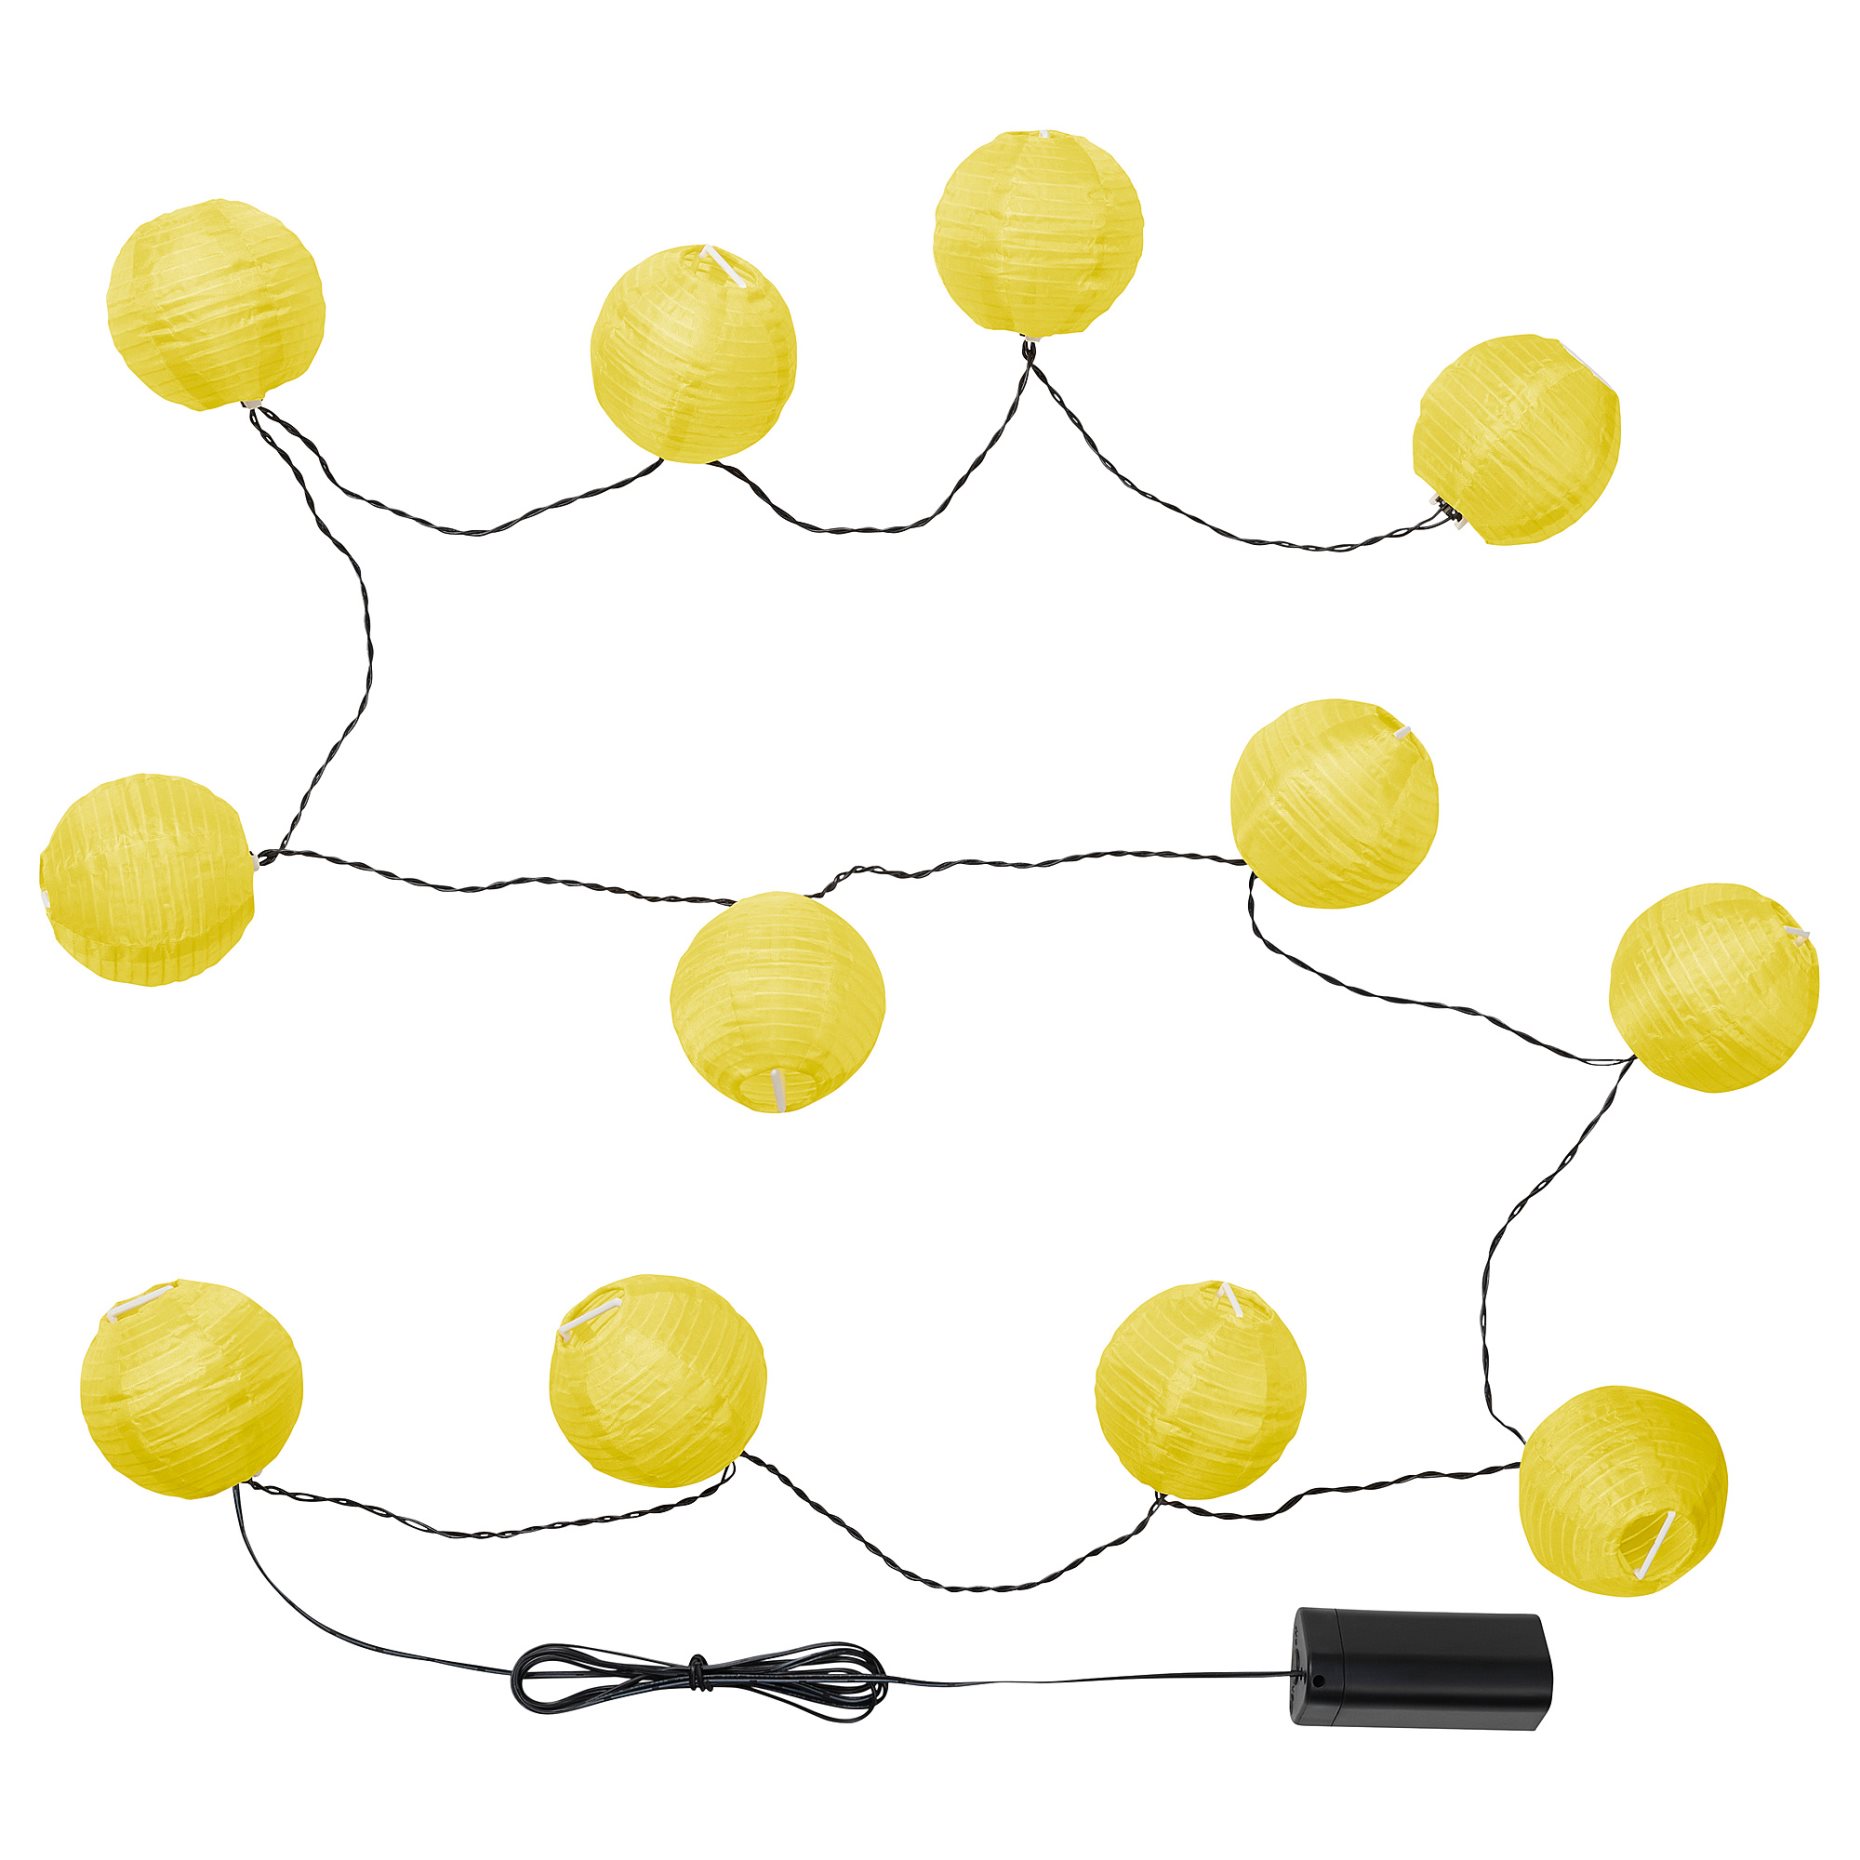 SOLVINDEN, lighting chain with built-in LED light source/12 lights/outdoor/battery-operated, 805.705.86